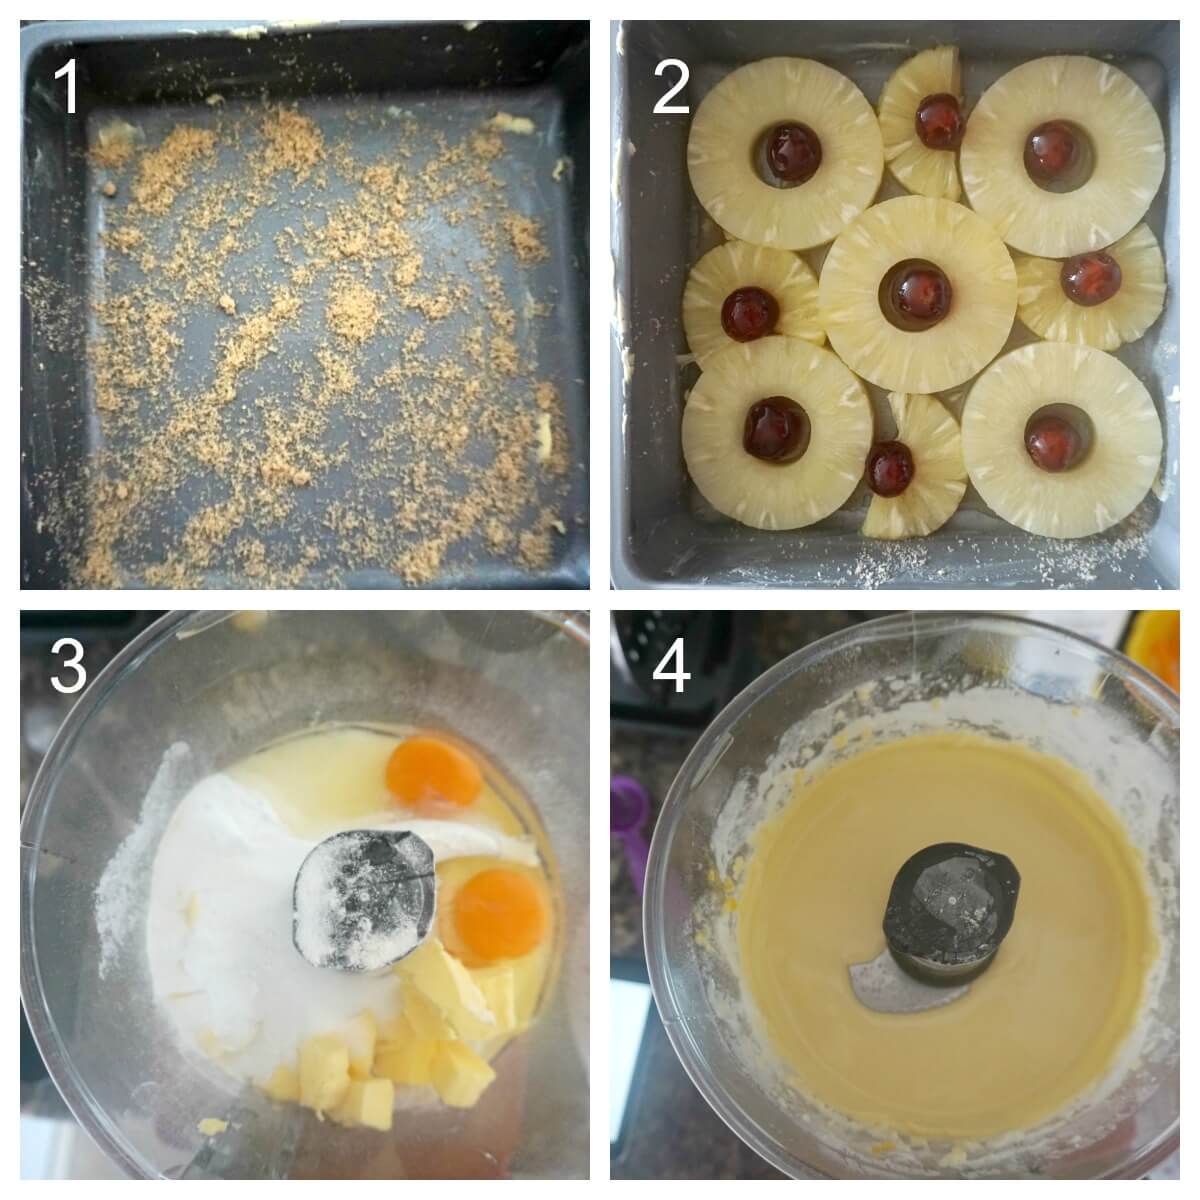 Collage of 4 photos to show how to make pineapple upside down cake.